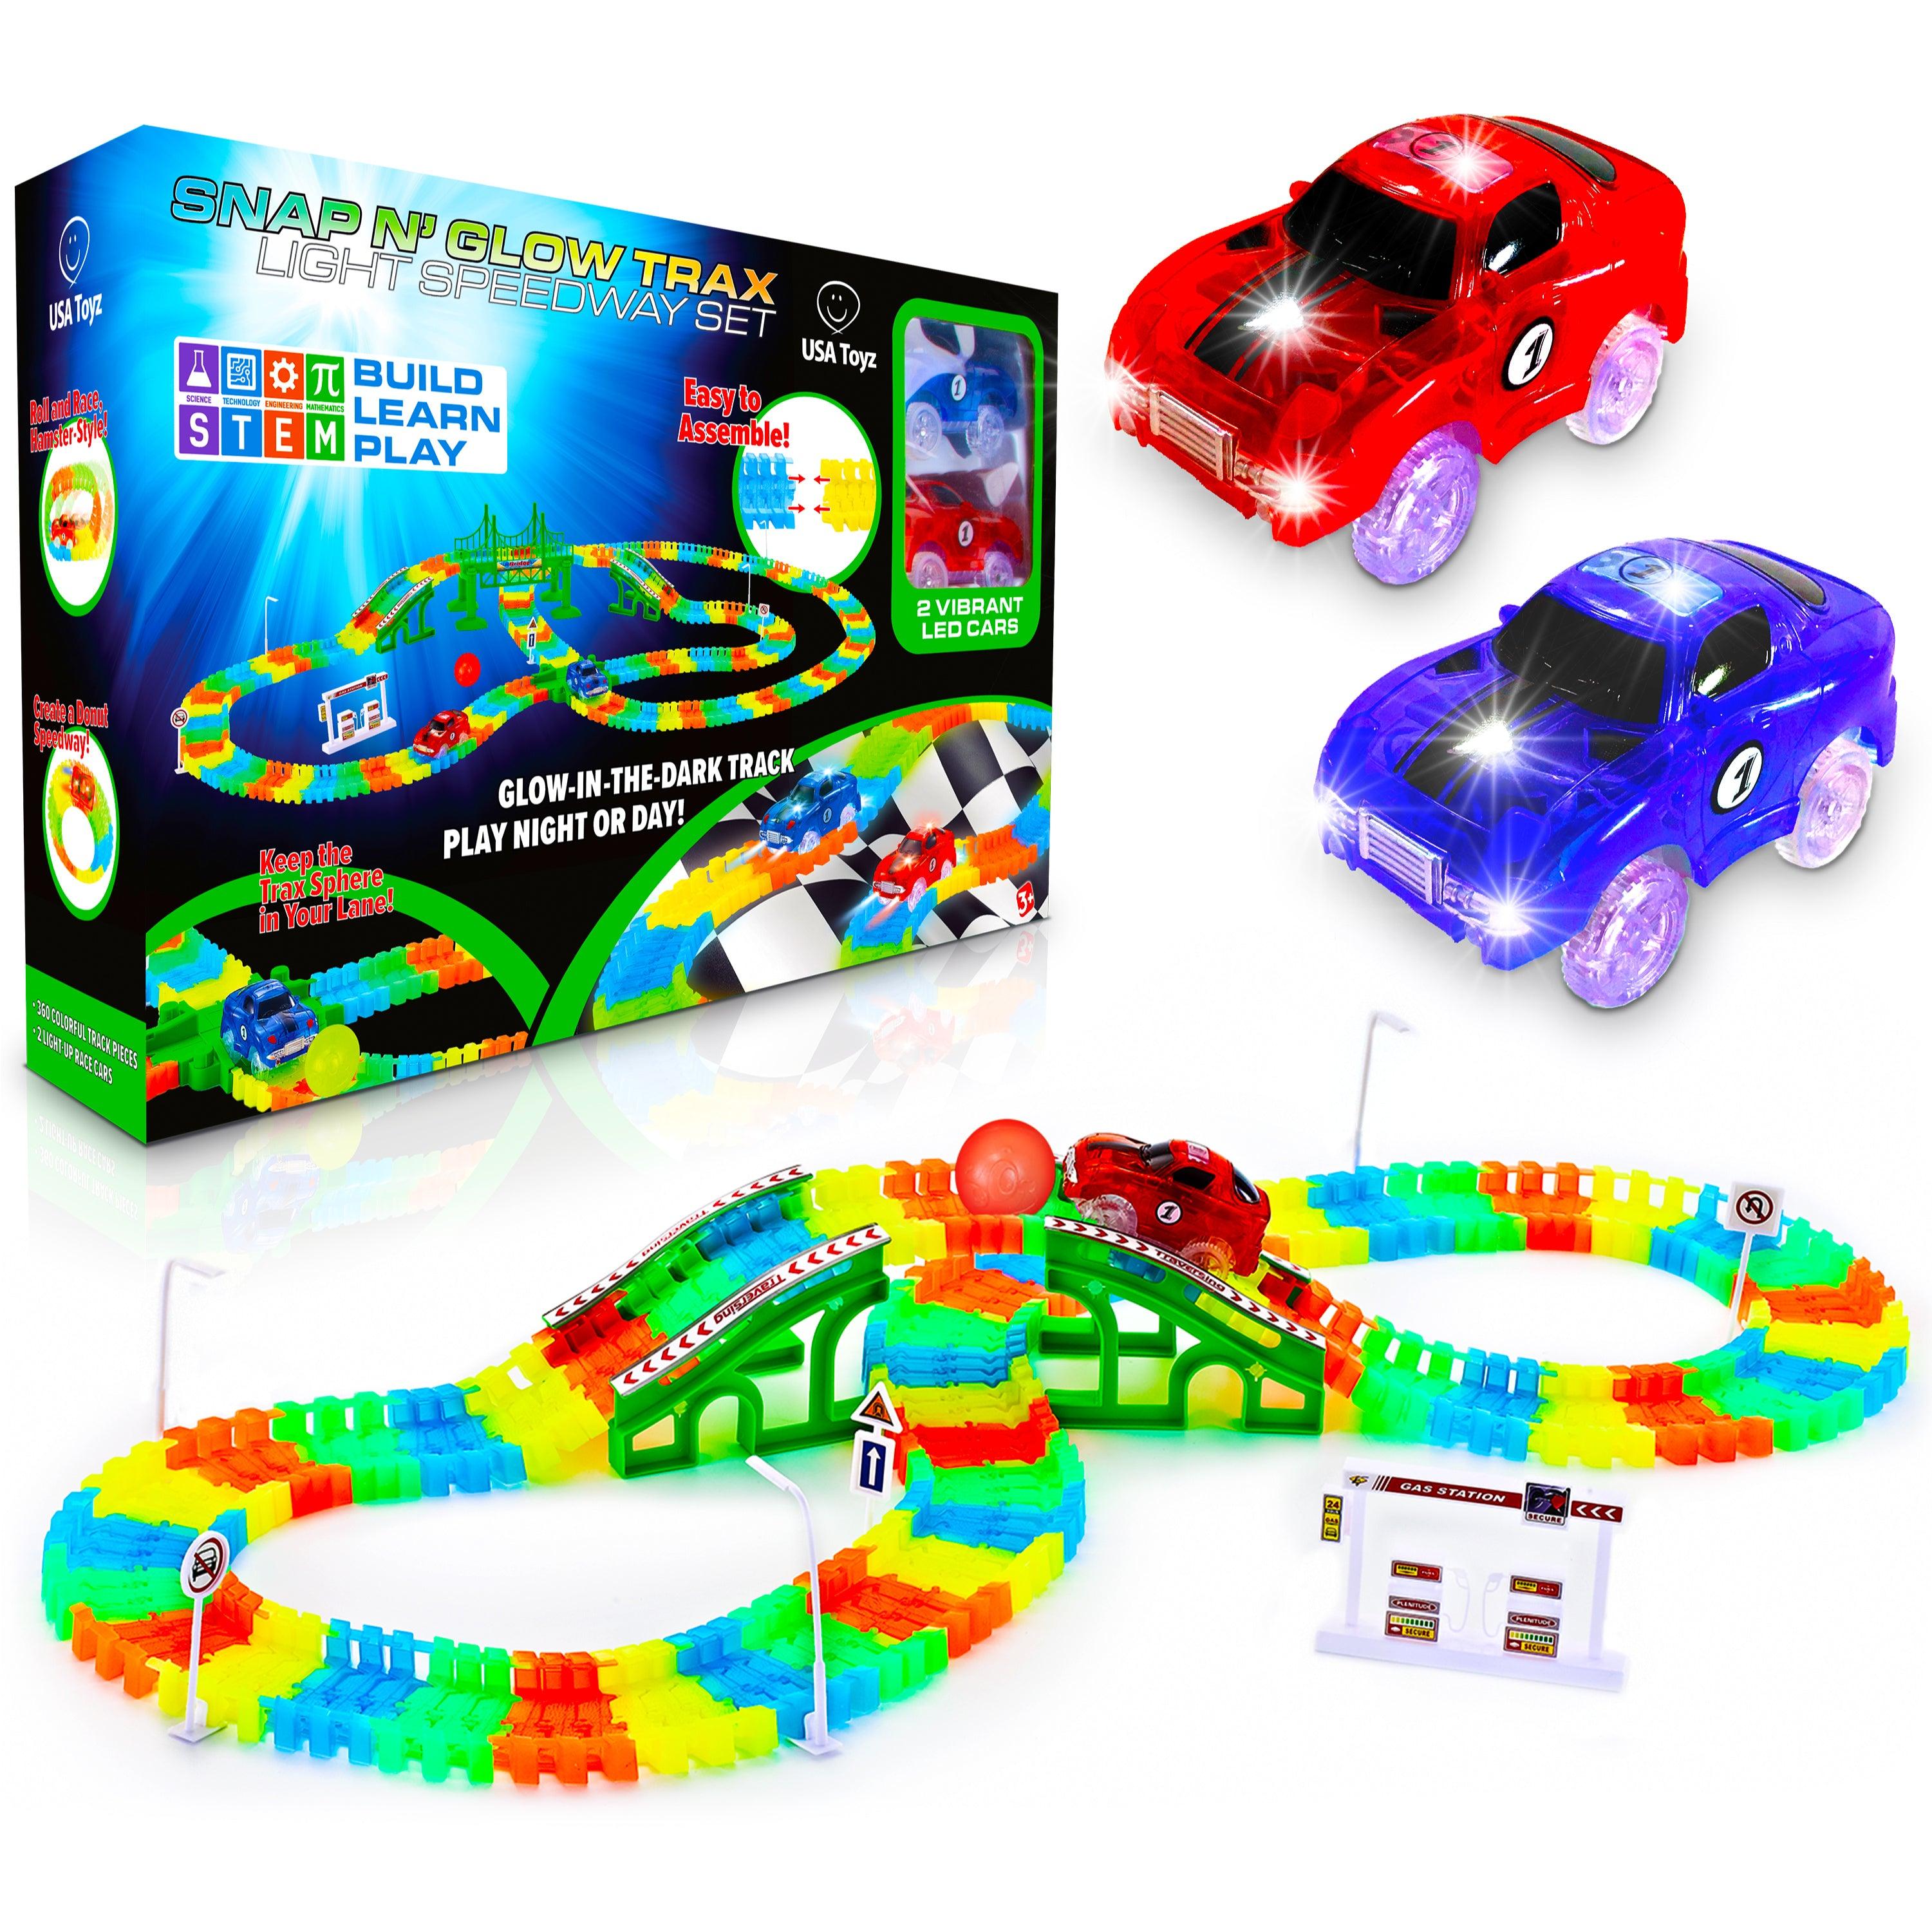 Magic Tracks Mega Set with 2 LED Race Car and 18 ft glow in the dark track 